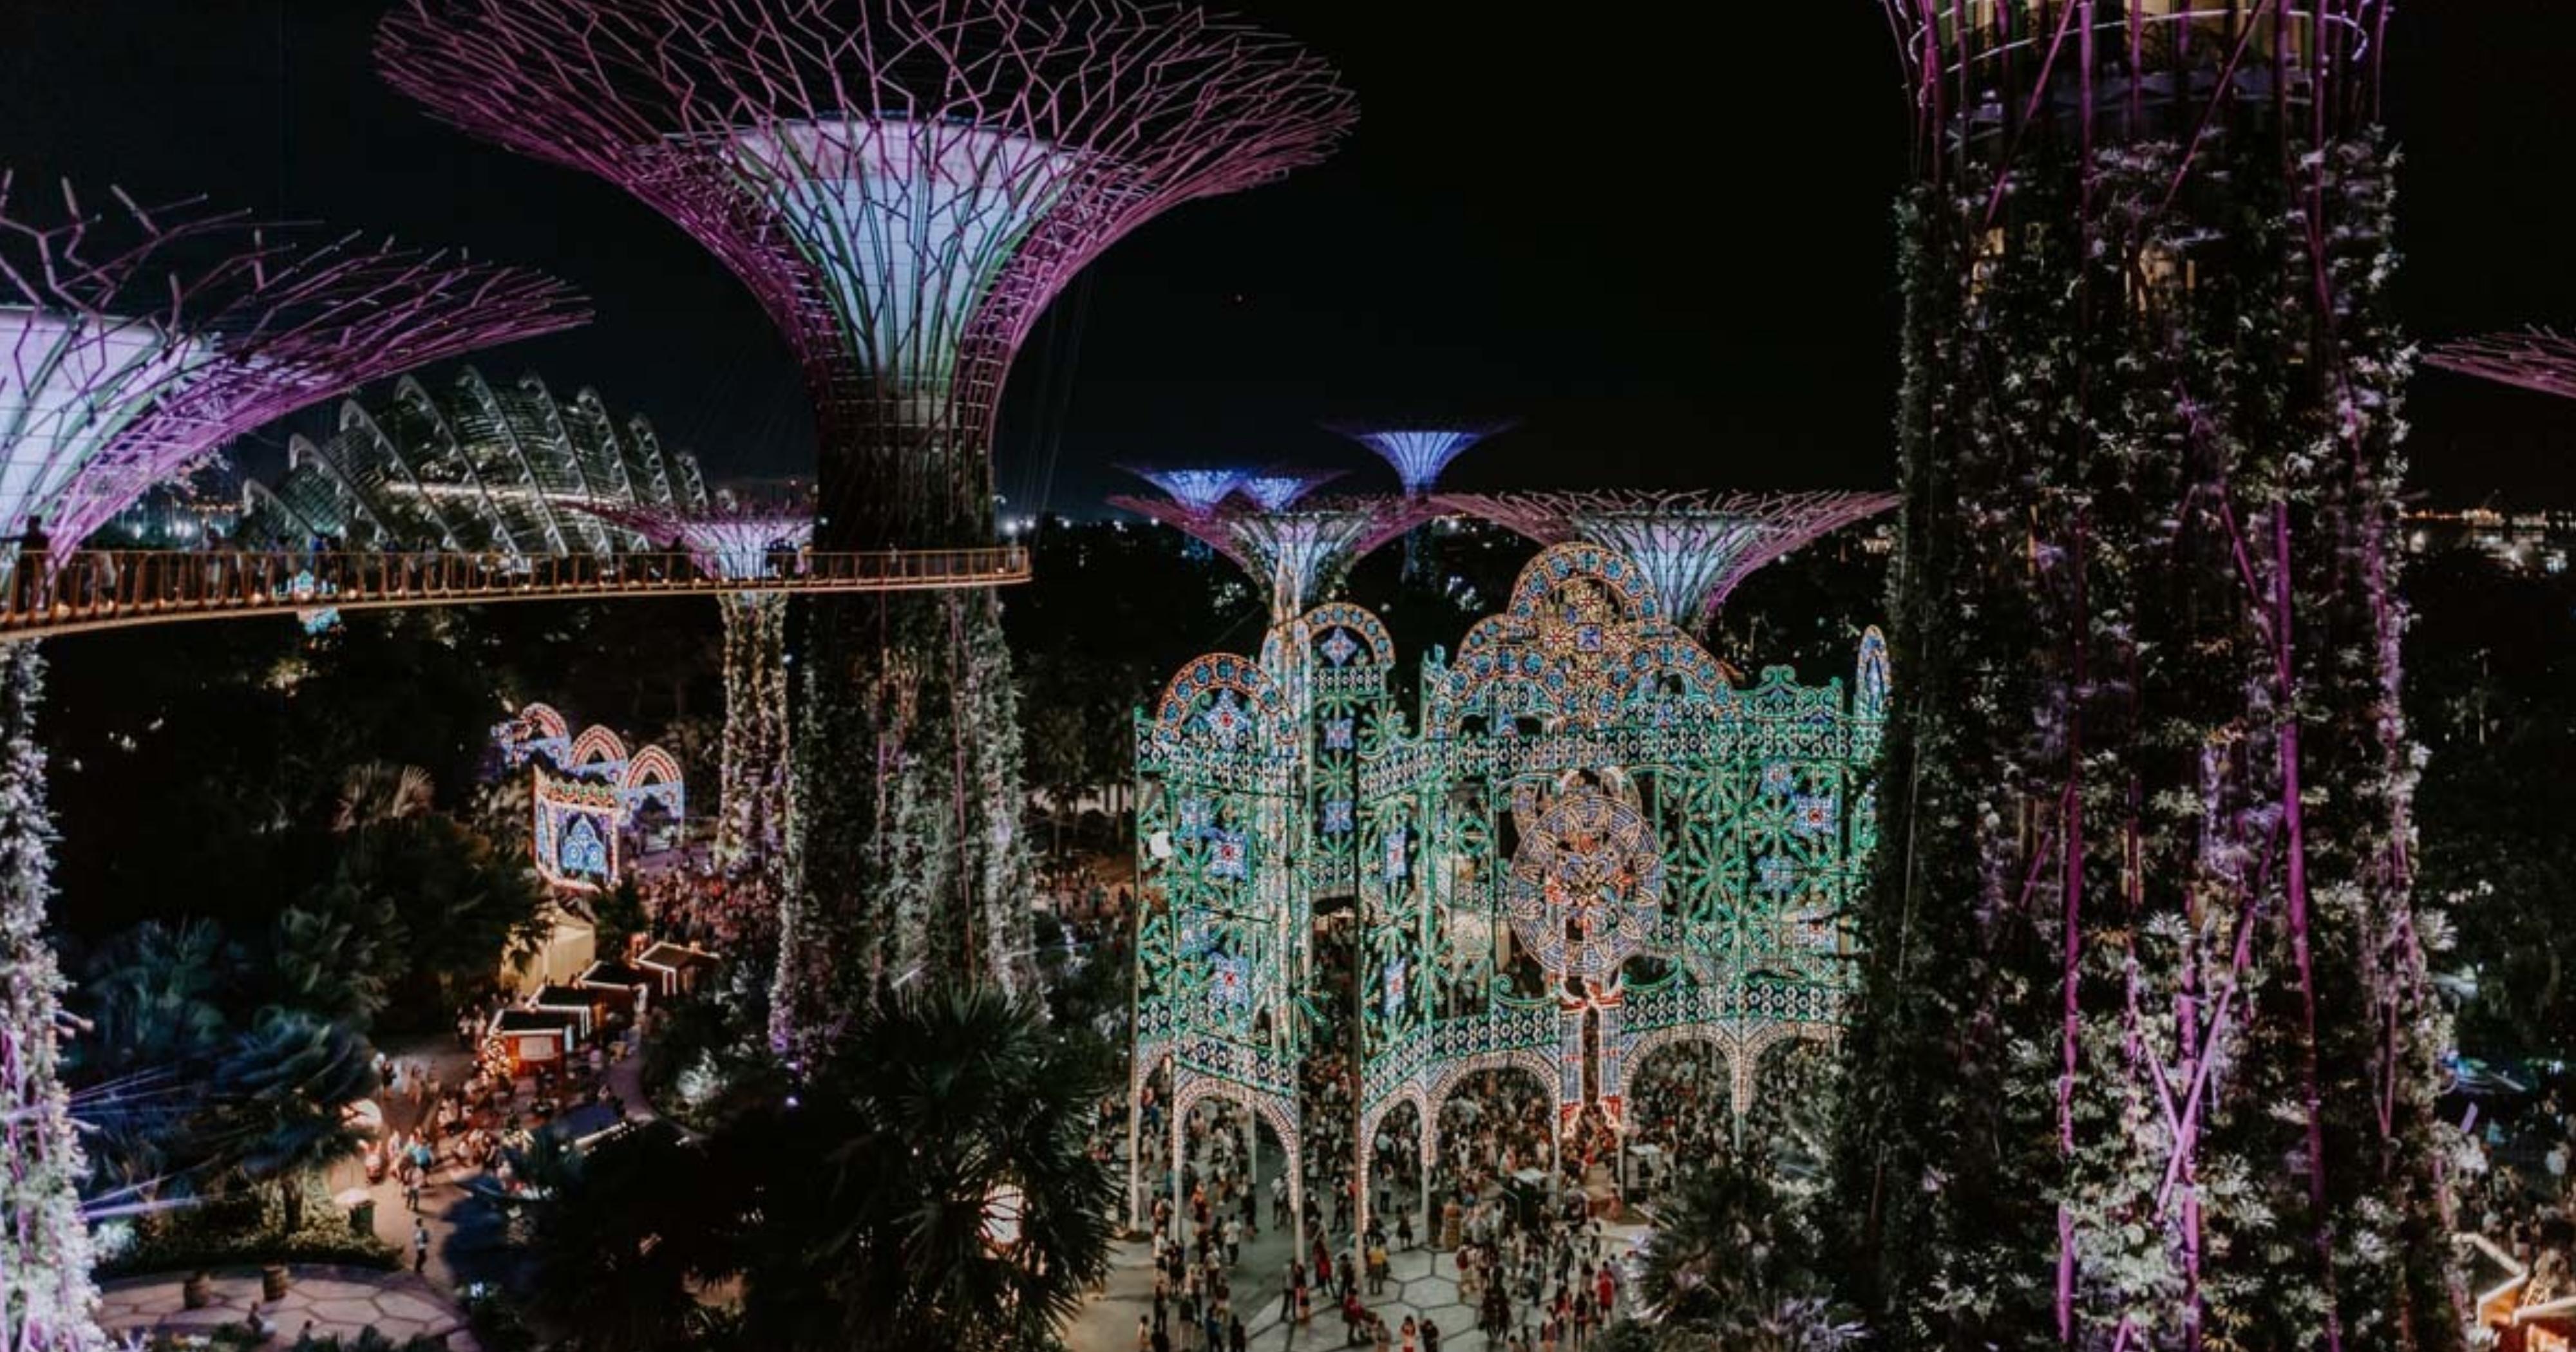 Christmas Wonderland Returns To Gardens By The Bay Nov 30 Dec 26 18 Mothership Sg News From Singapore Asia And Around The World